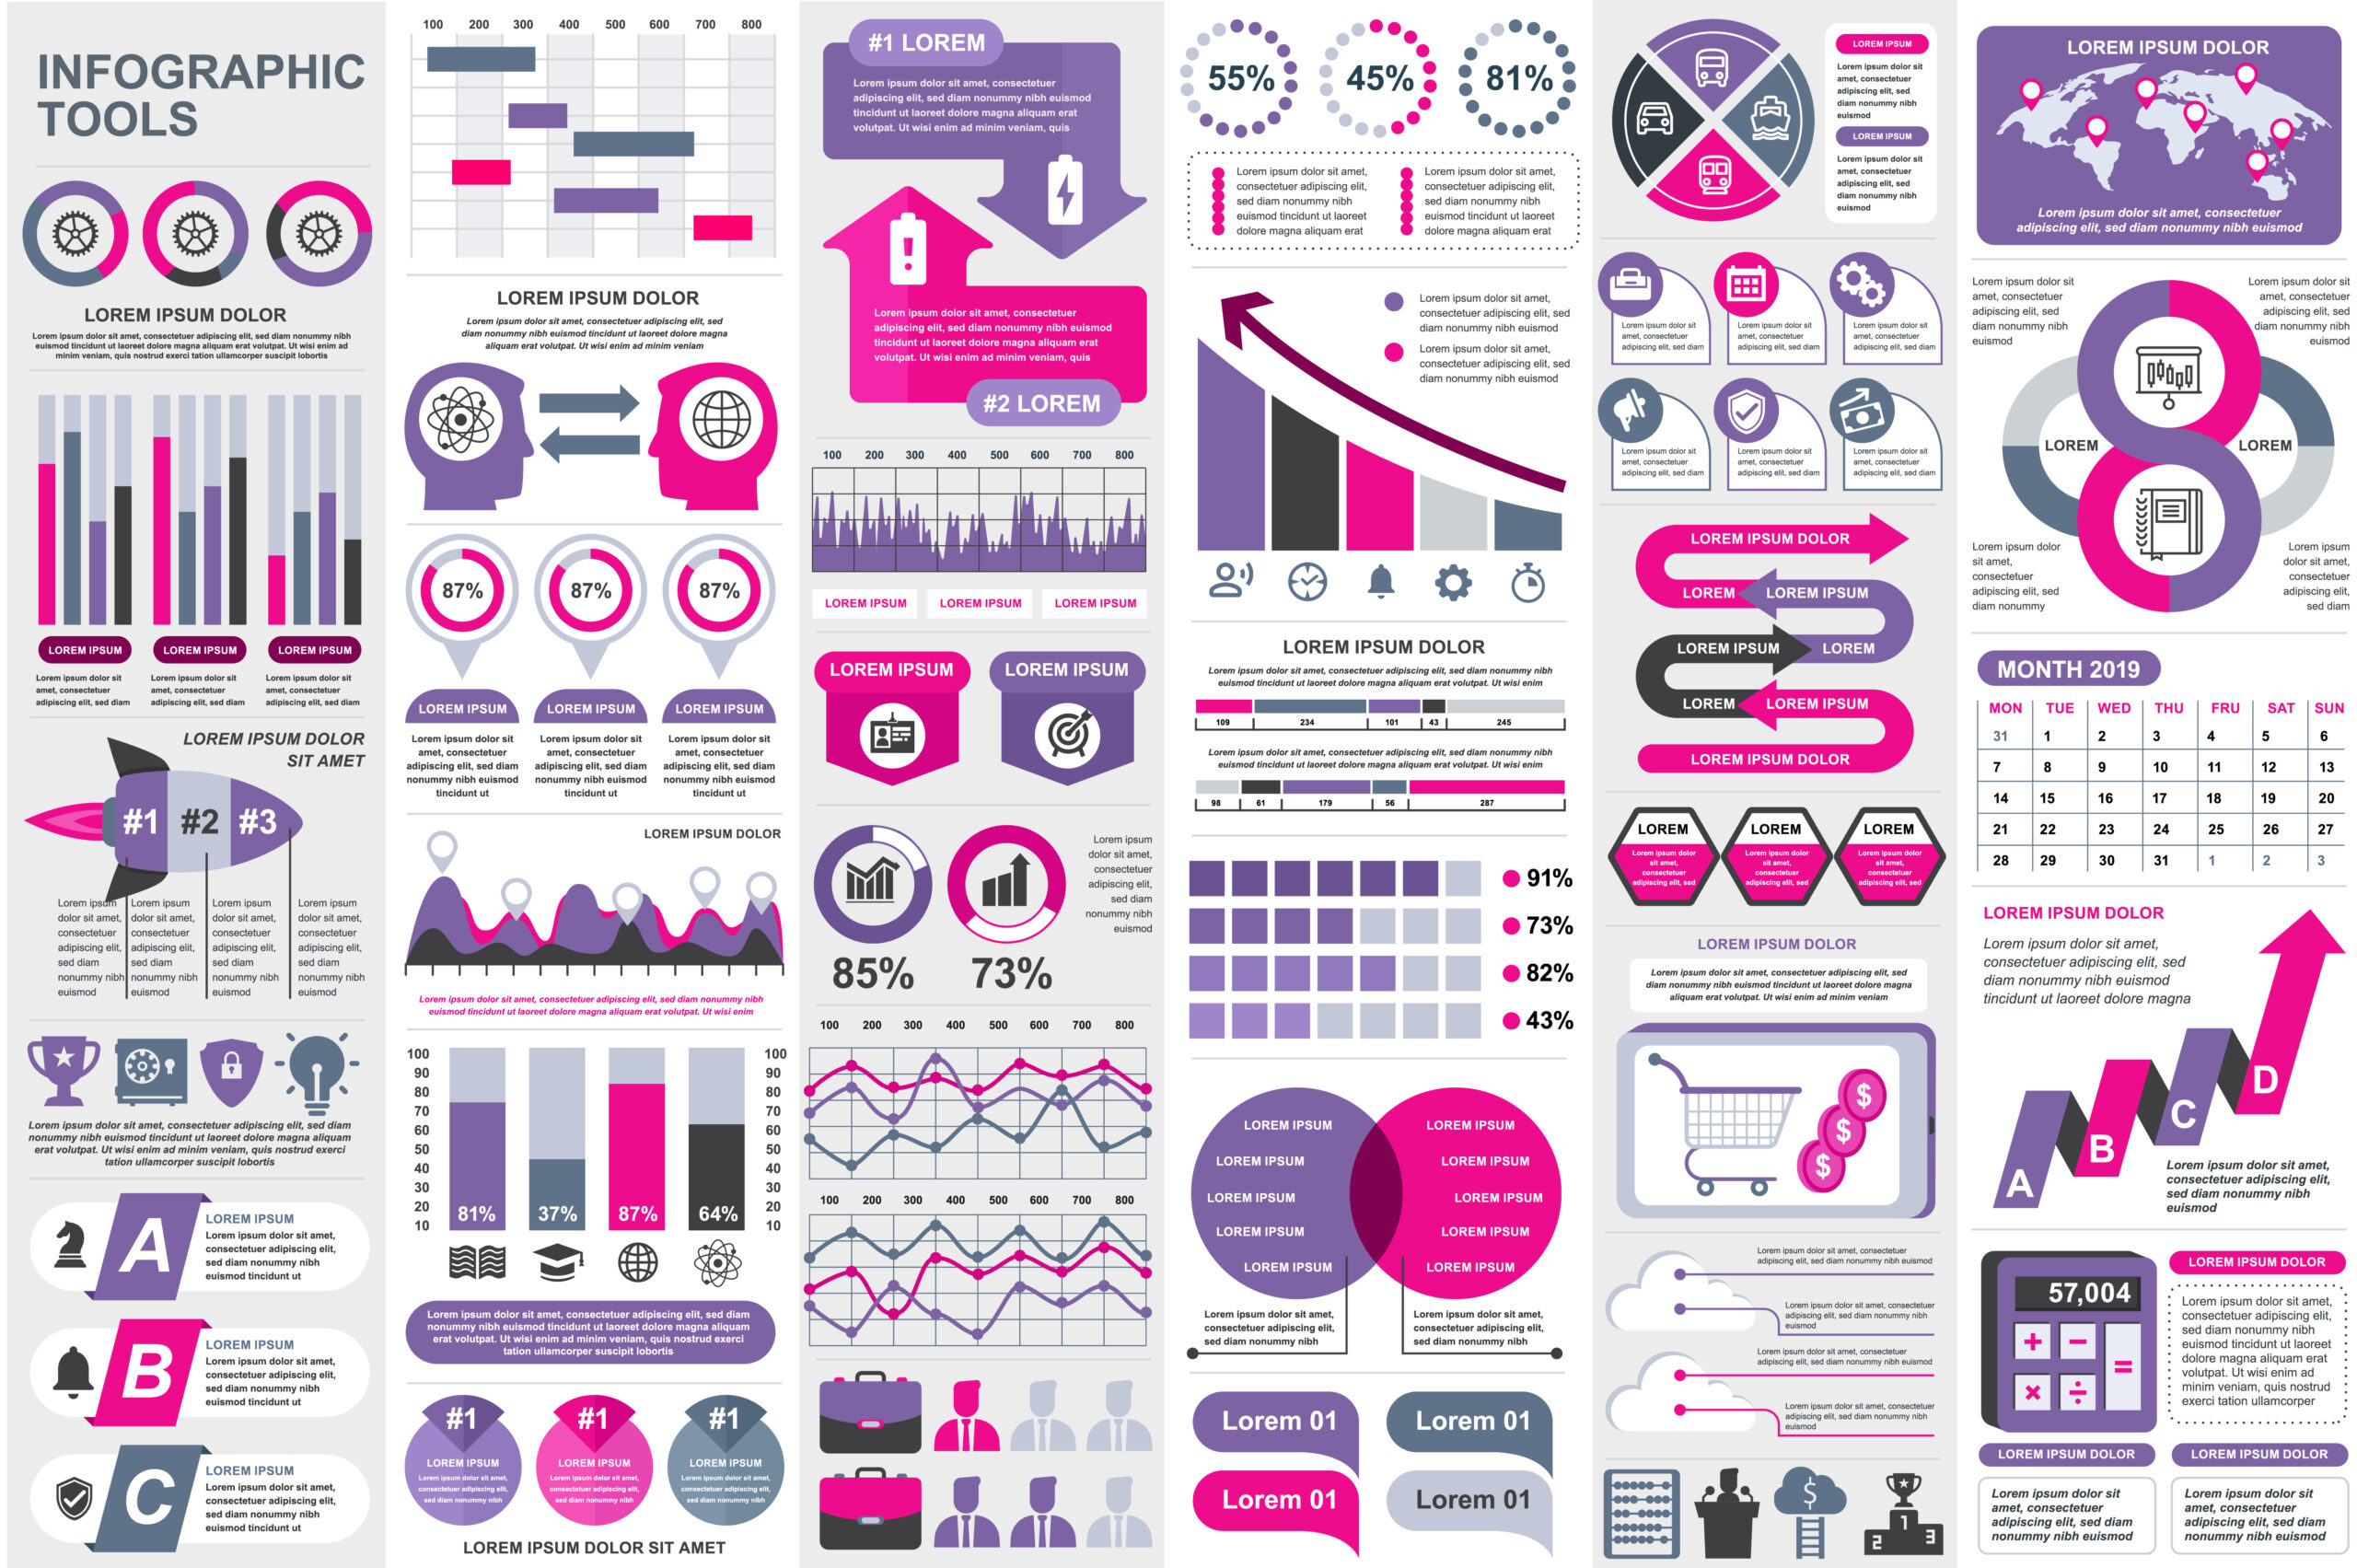 Infographics - The Benefits of Their Use Online | Visual.ly | Creative infographic, Infographic ...